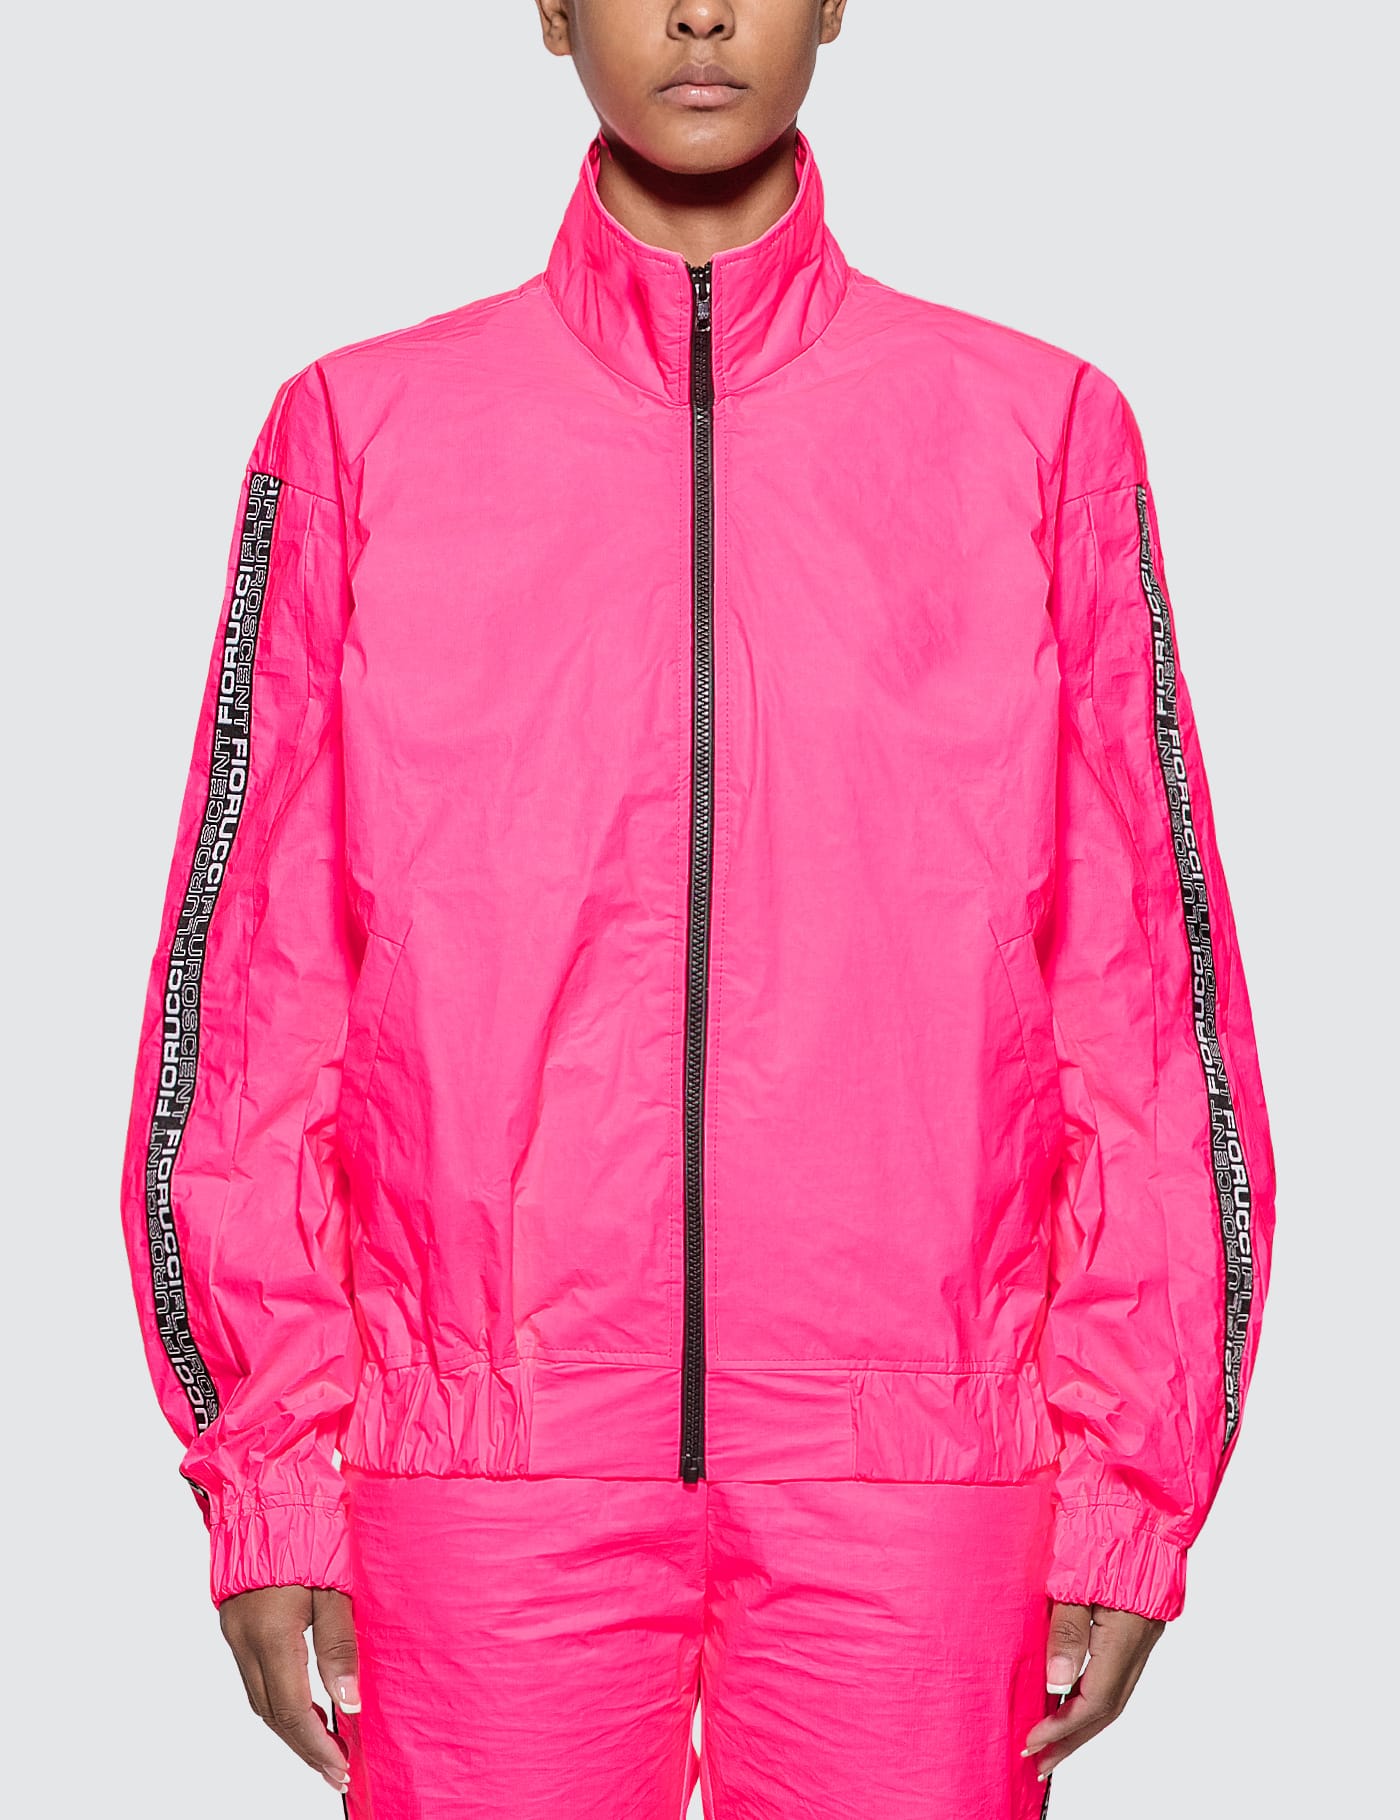 Fiorucci - Tyvek Neon Pink Bomber Jacket | HBX - Globally Curated 